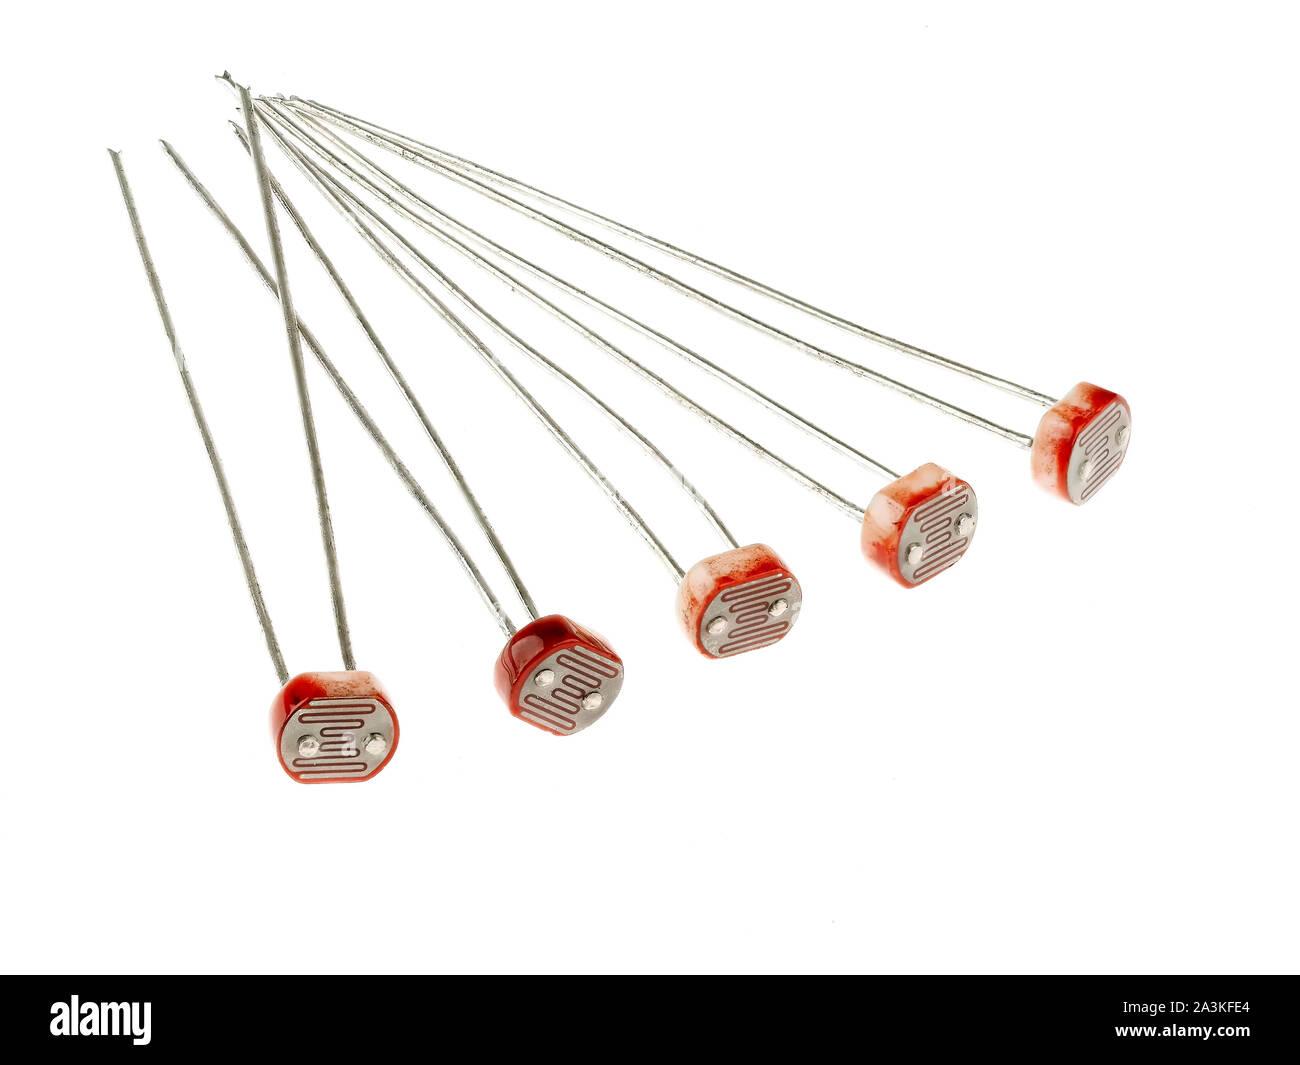 a-group-of-photoresistors-or-light-dependent-resistor-ldr-or-photo-conductive-cell-isolated-on-white-they-are-light-controlled-variable-resistor-2A3KFE4.jpg